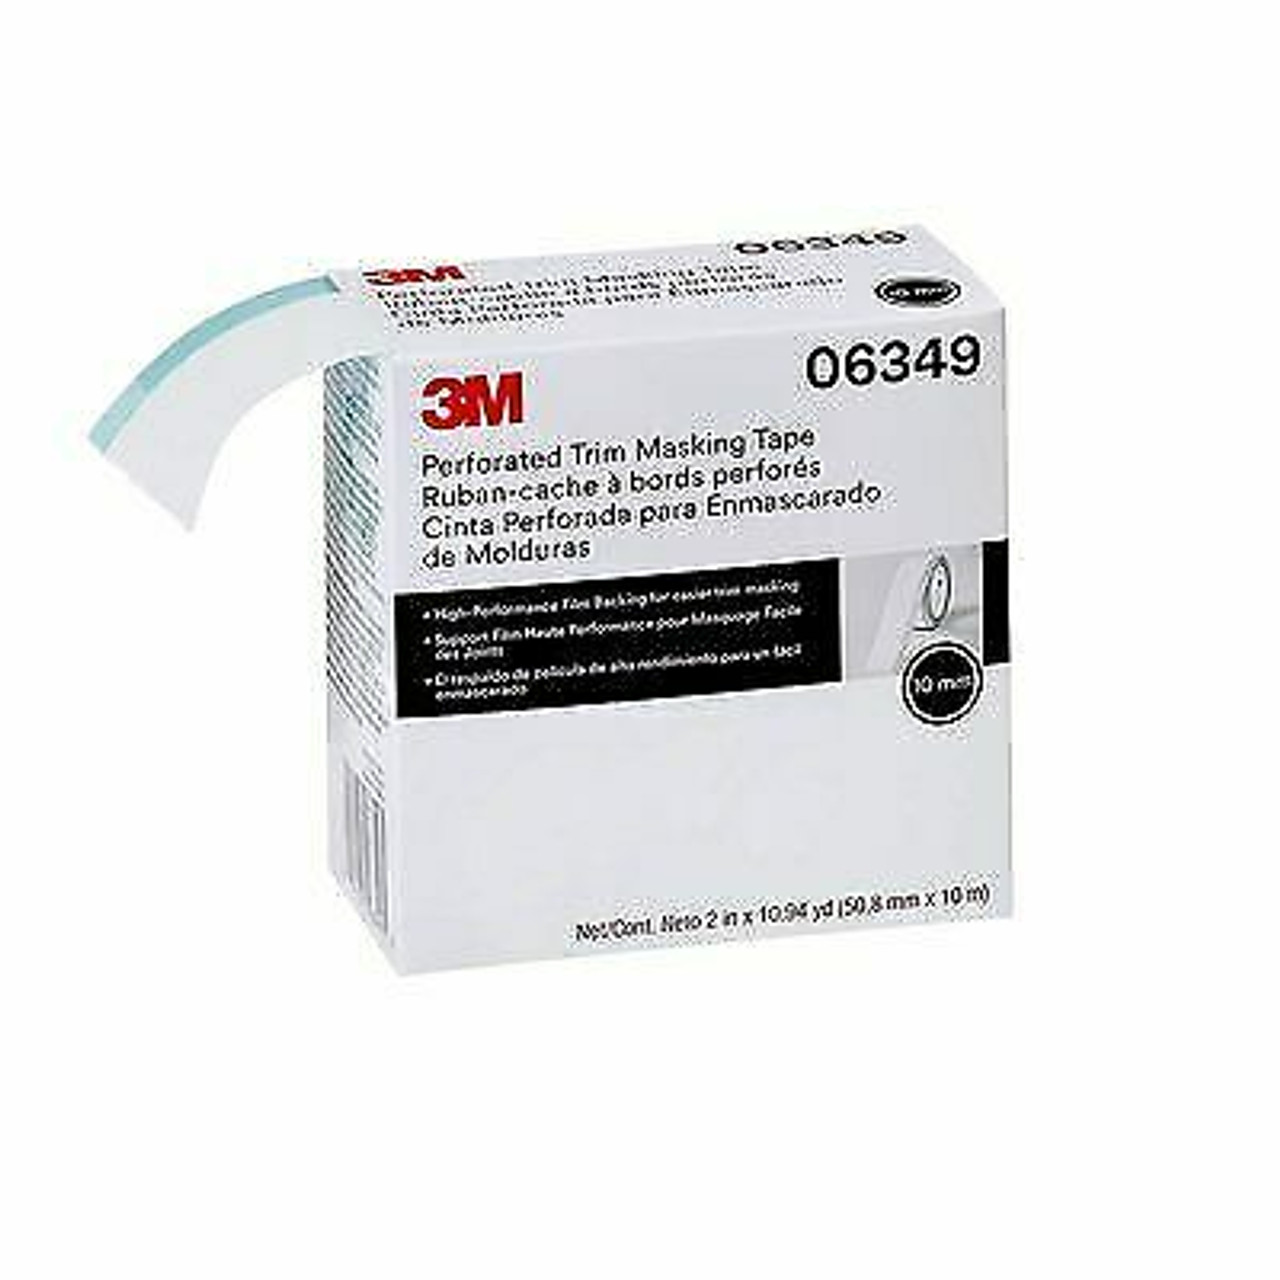 3M 06349 Perforated Trim Masking Tape 50.8 mm (2 in) x 10 m  RL